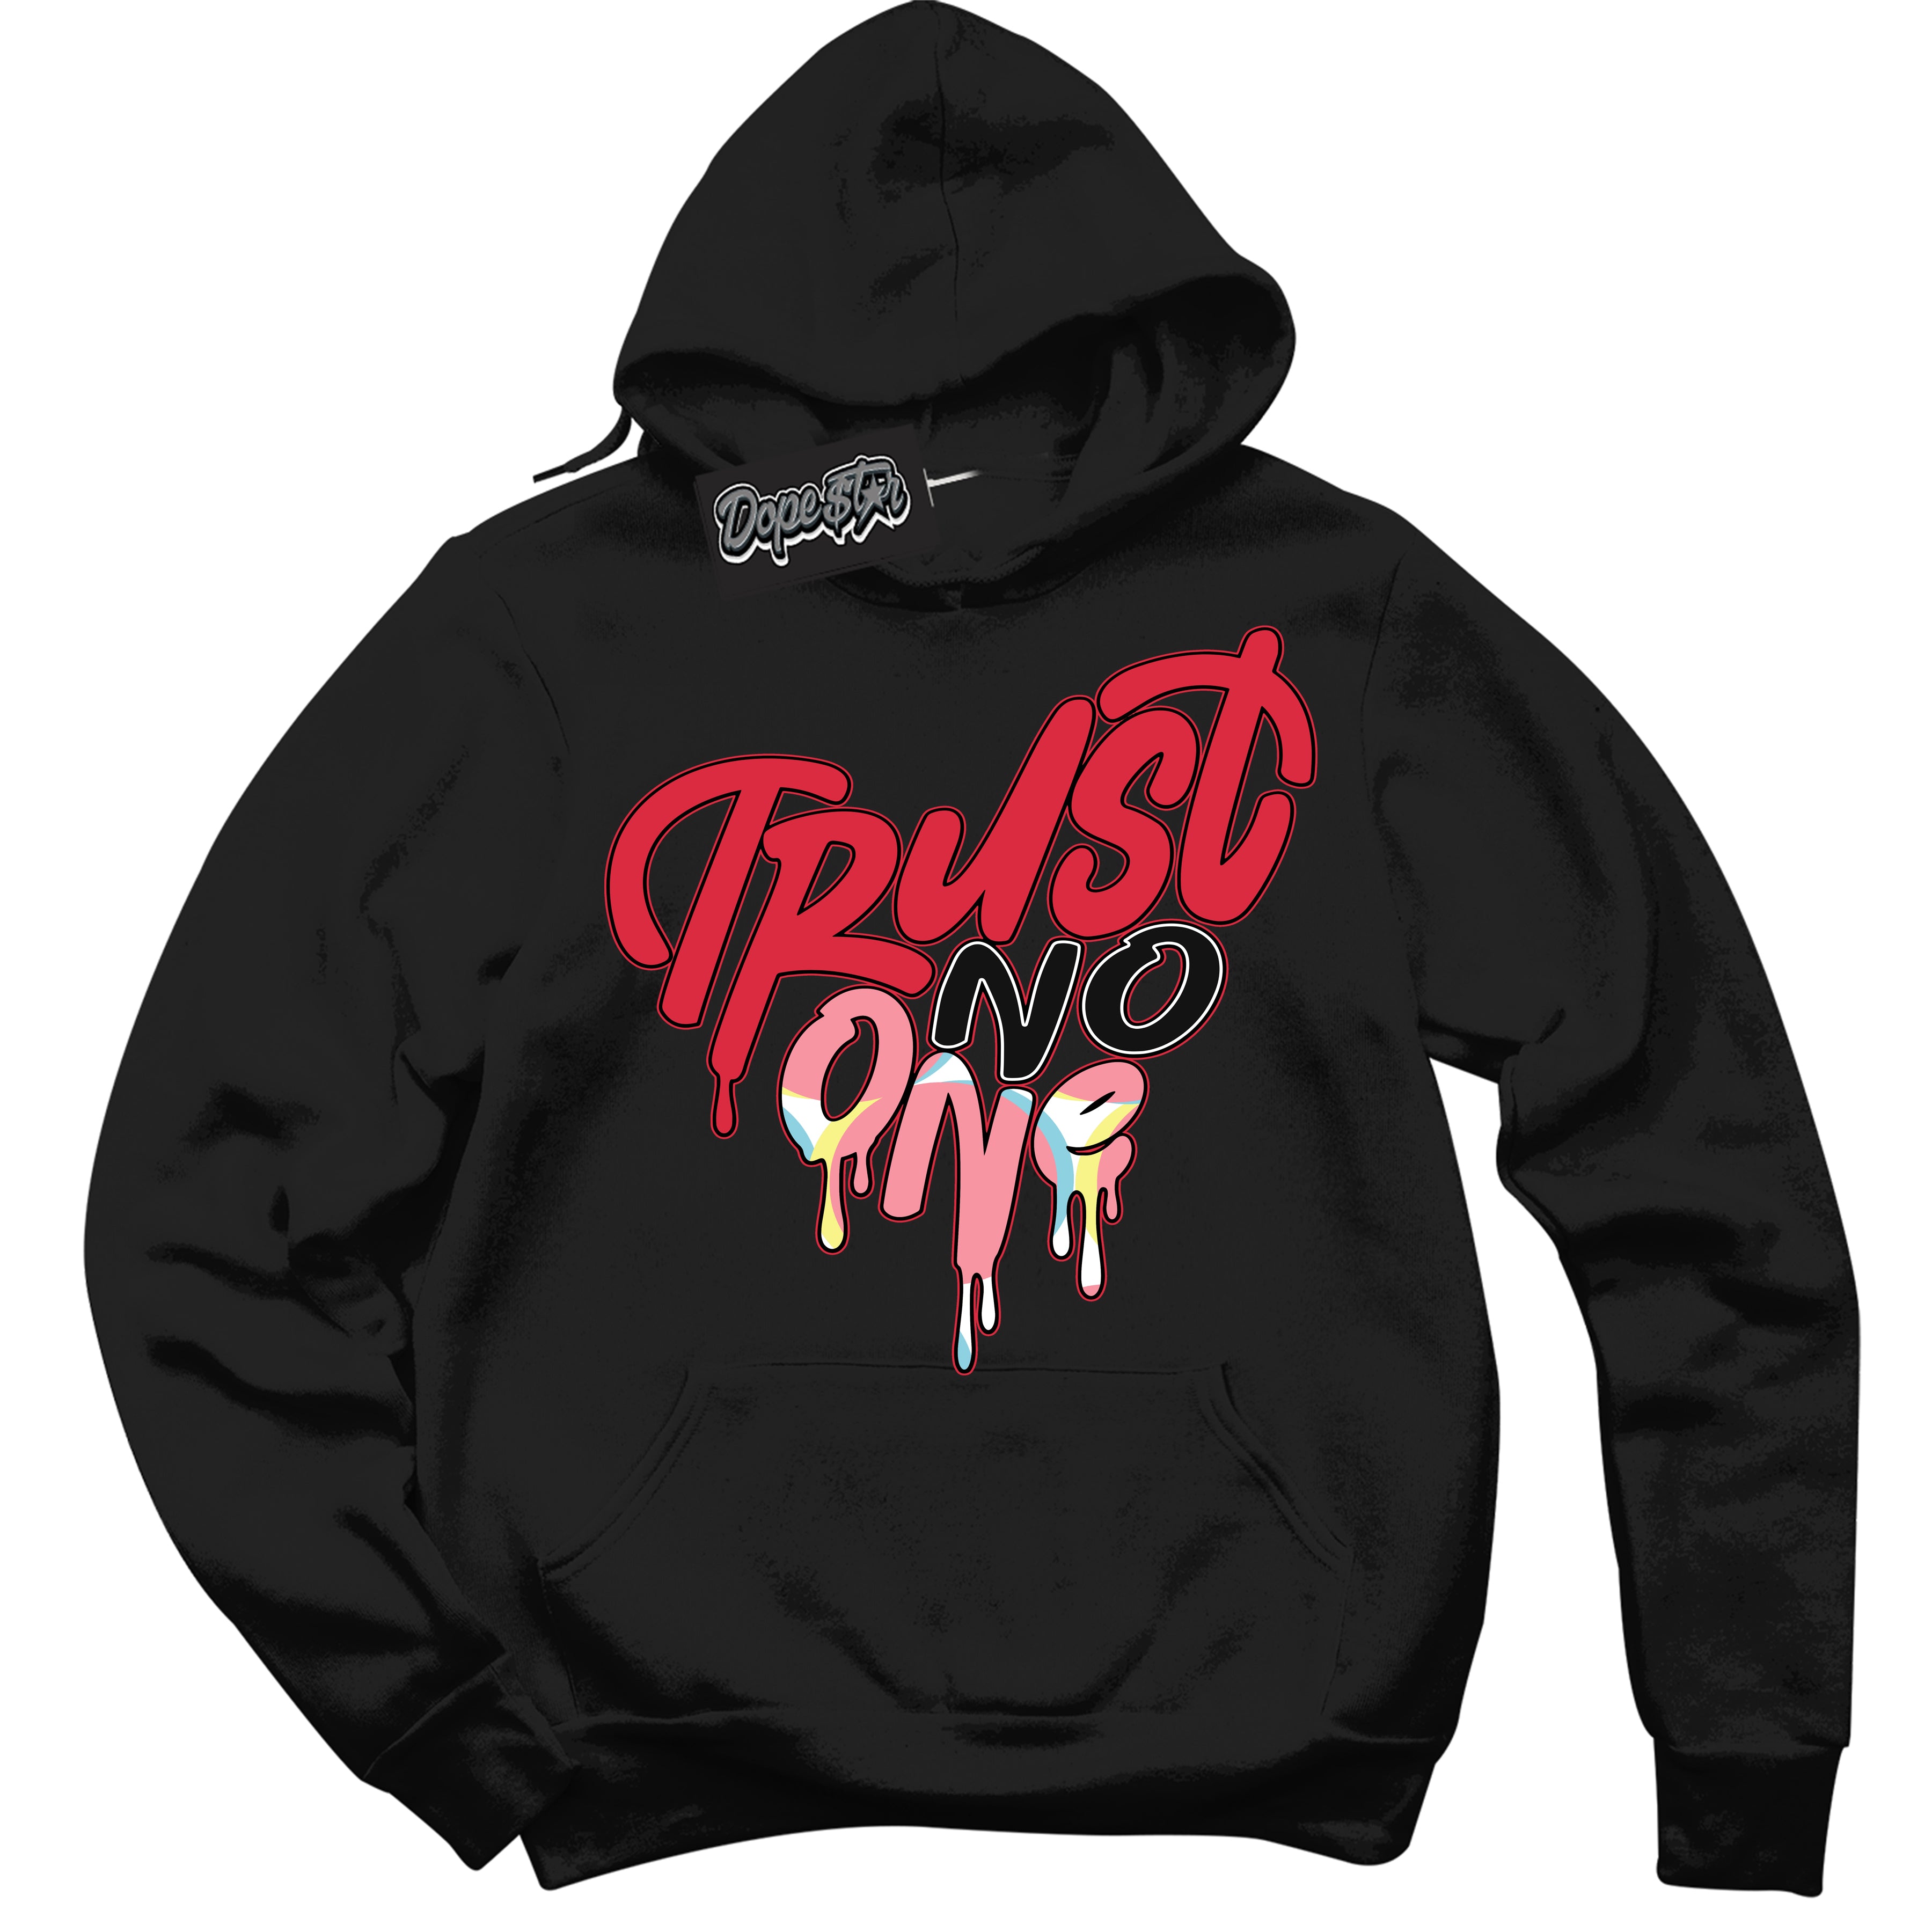 Cool Black Graphic DopeStar Hoodie with “ Trust No One Heart “ print, that perfectly matches Spider-Verse 1s sneakers